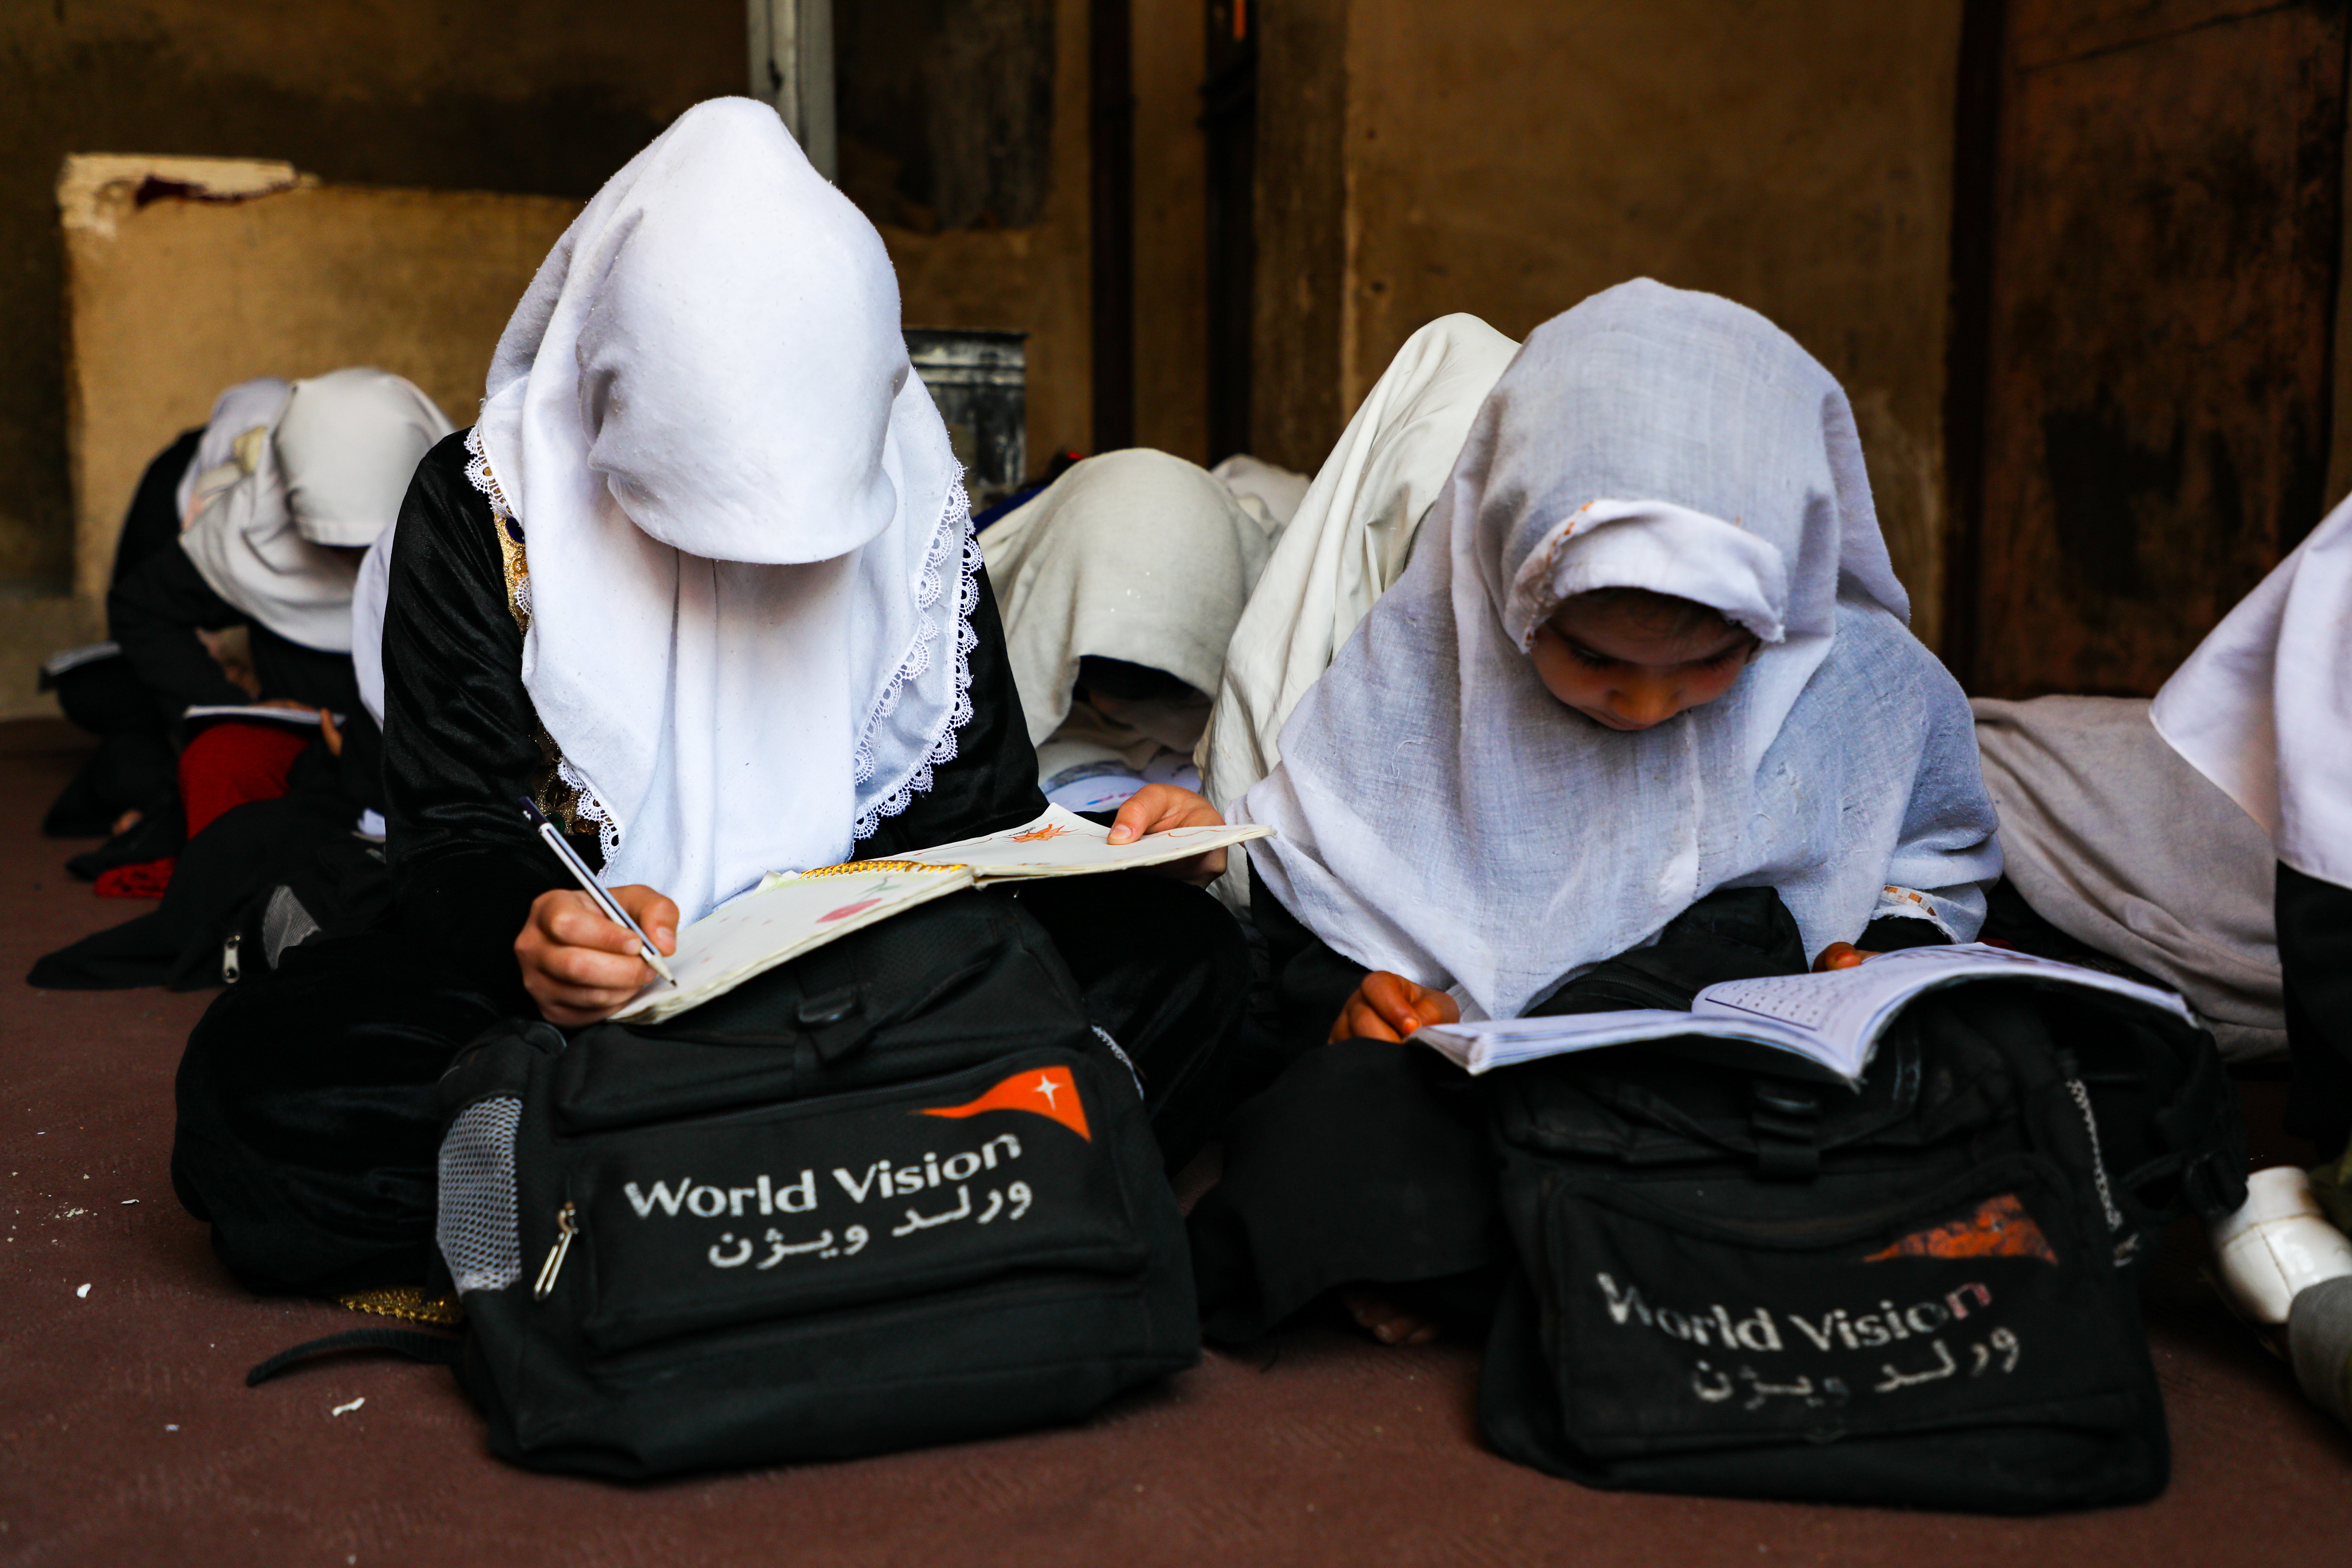 In Afghanistan, two girls in head coverings sit on the floor in a classroom working in their notebooks. They each have a World Vision Afghanistan backpack. 